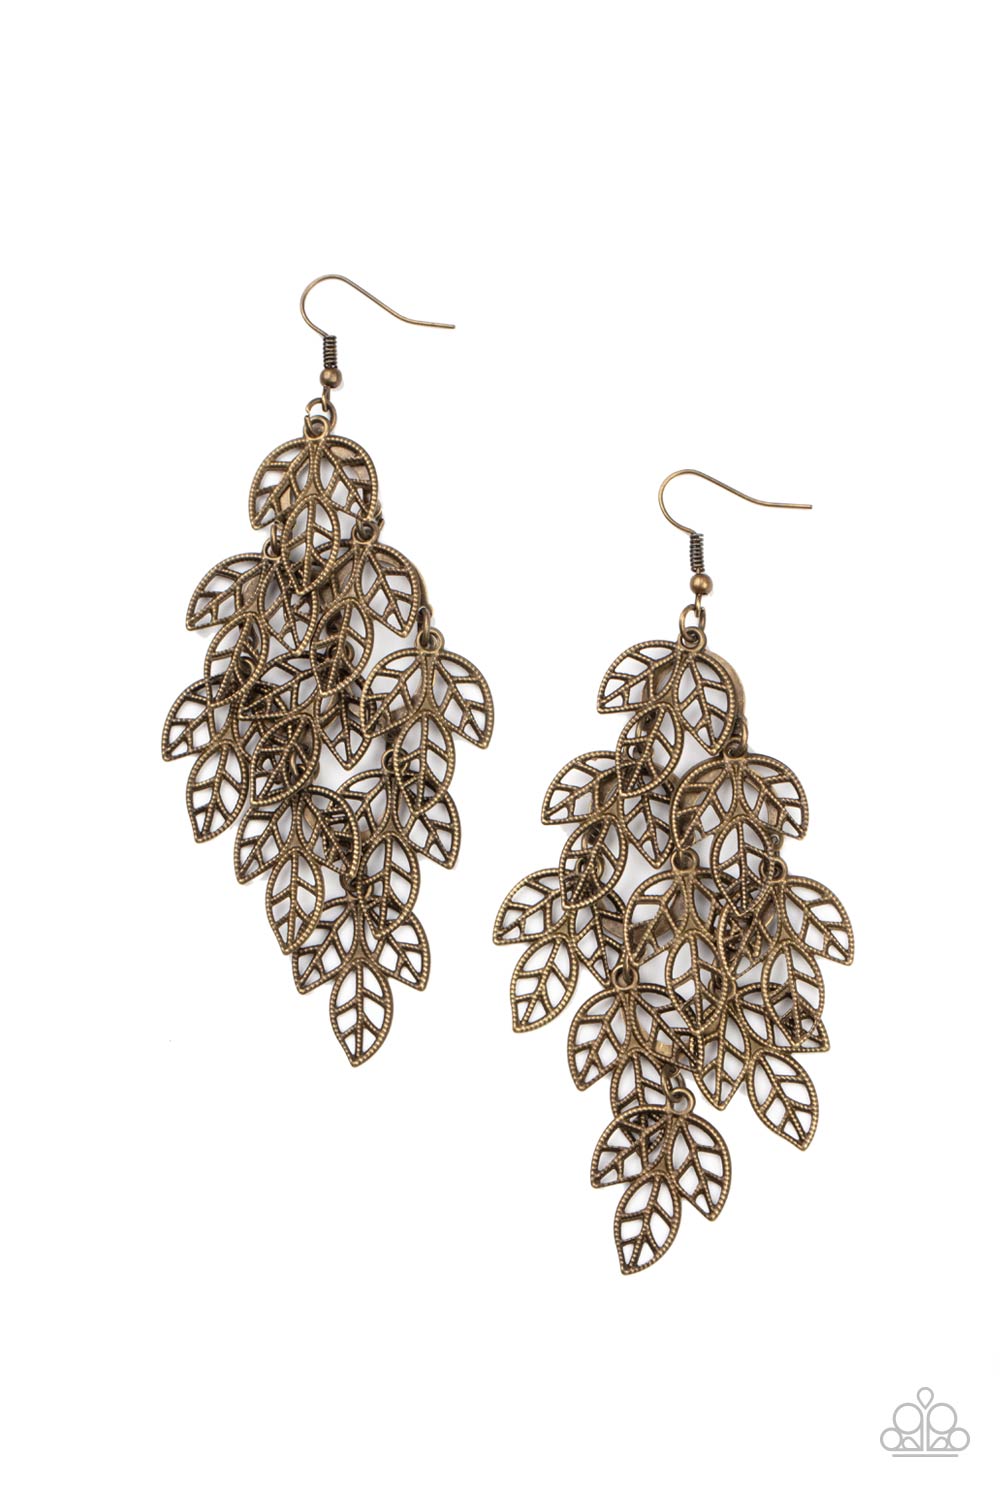 Brushed in a rustic finish, trios of brass leaves cascade from a metallic netted backdrop, creating a seasonal tassel. Earring attaches to a standard fishhook fitting